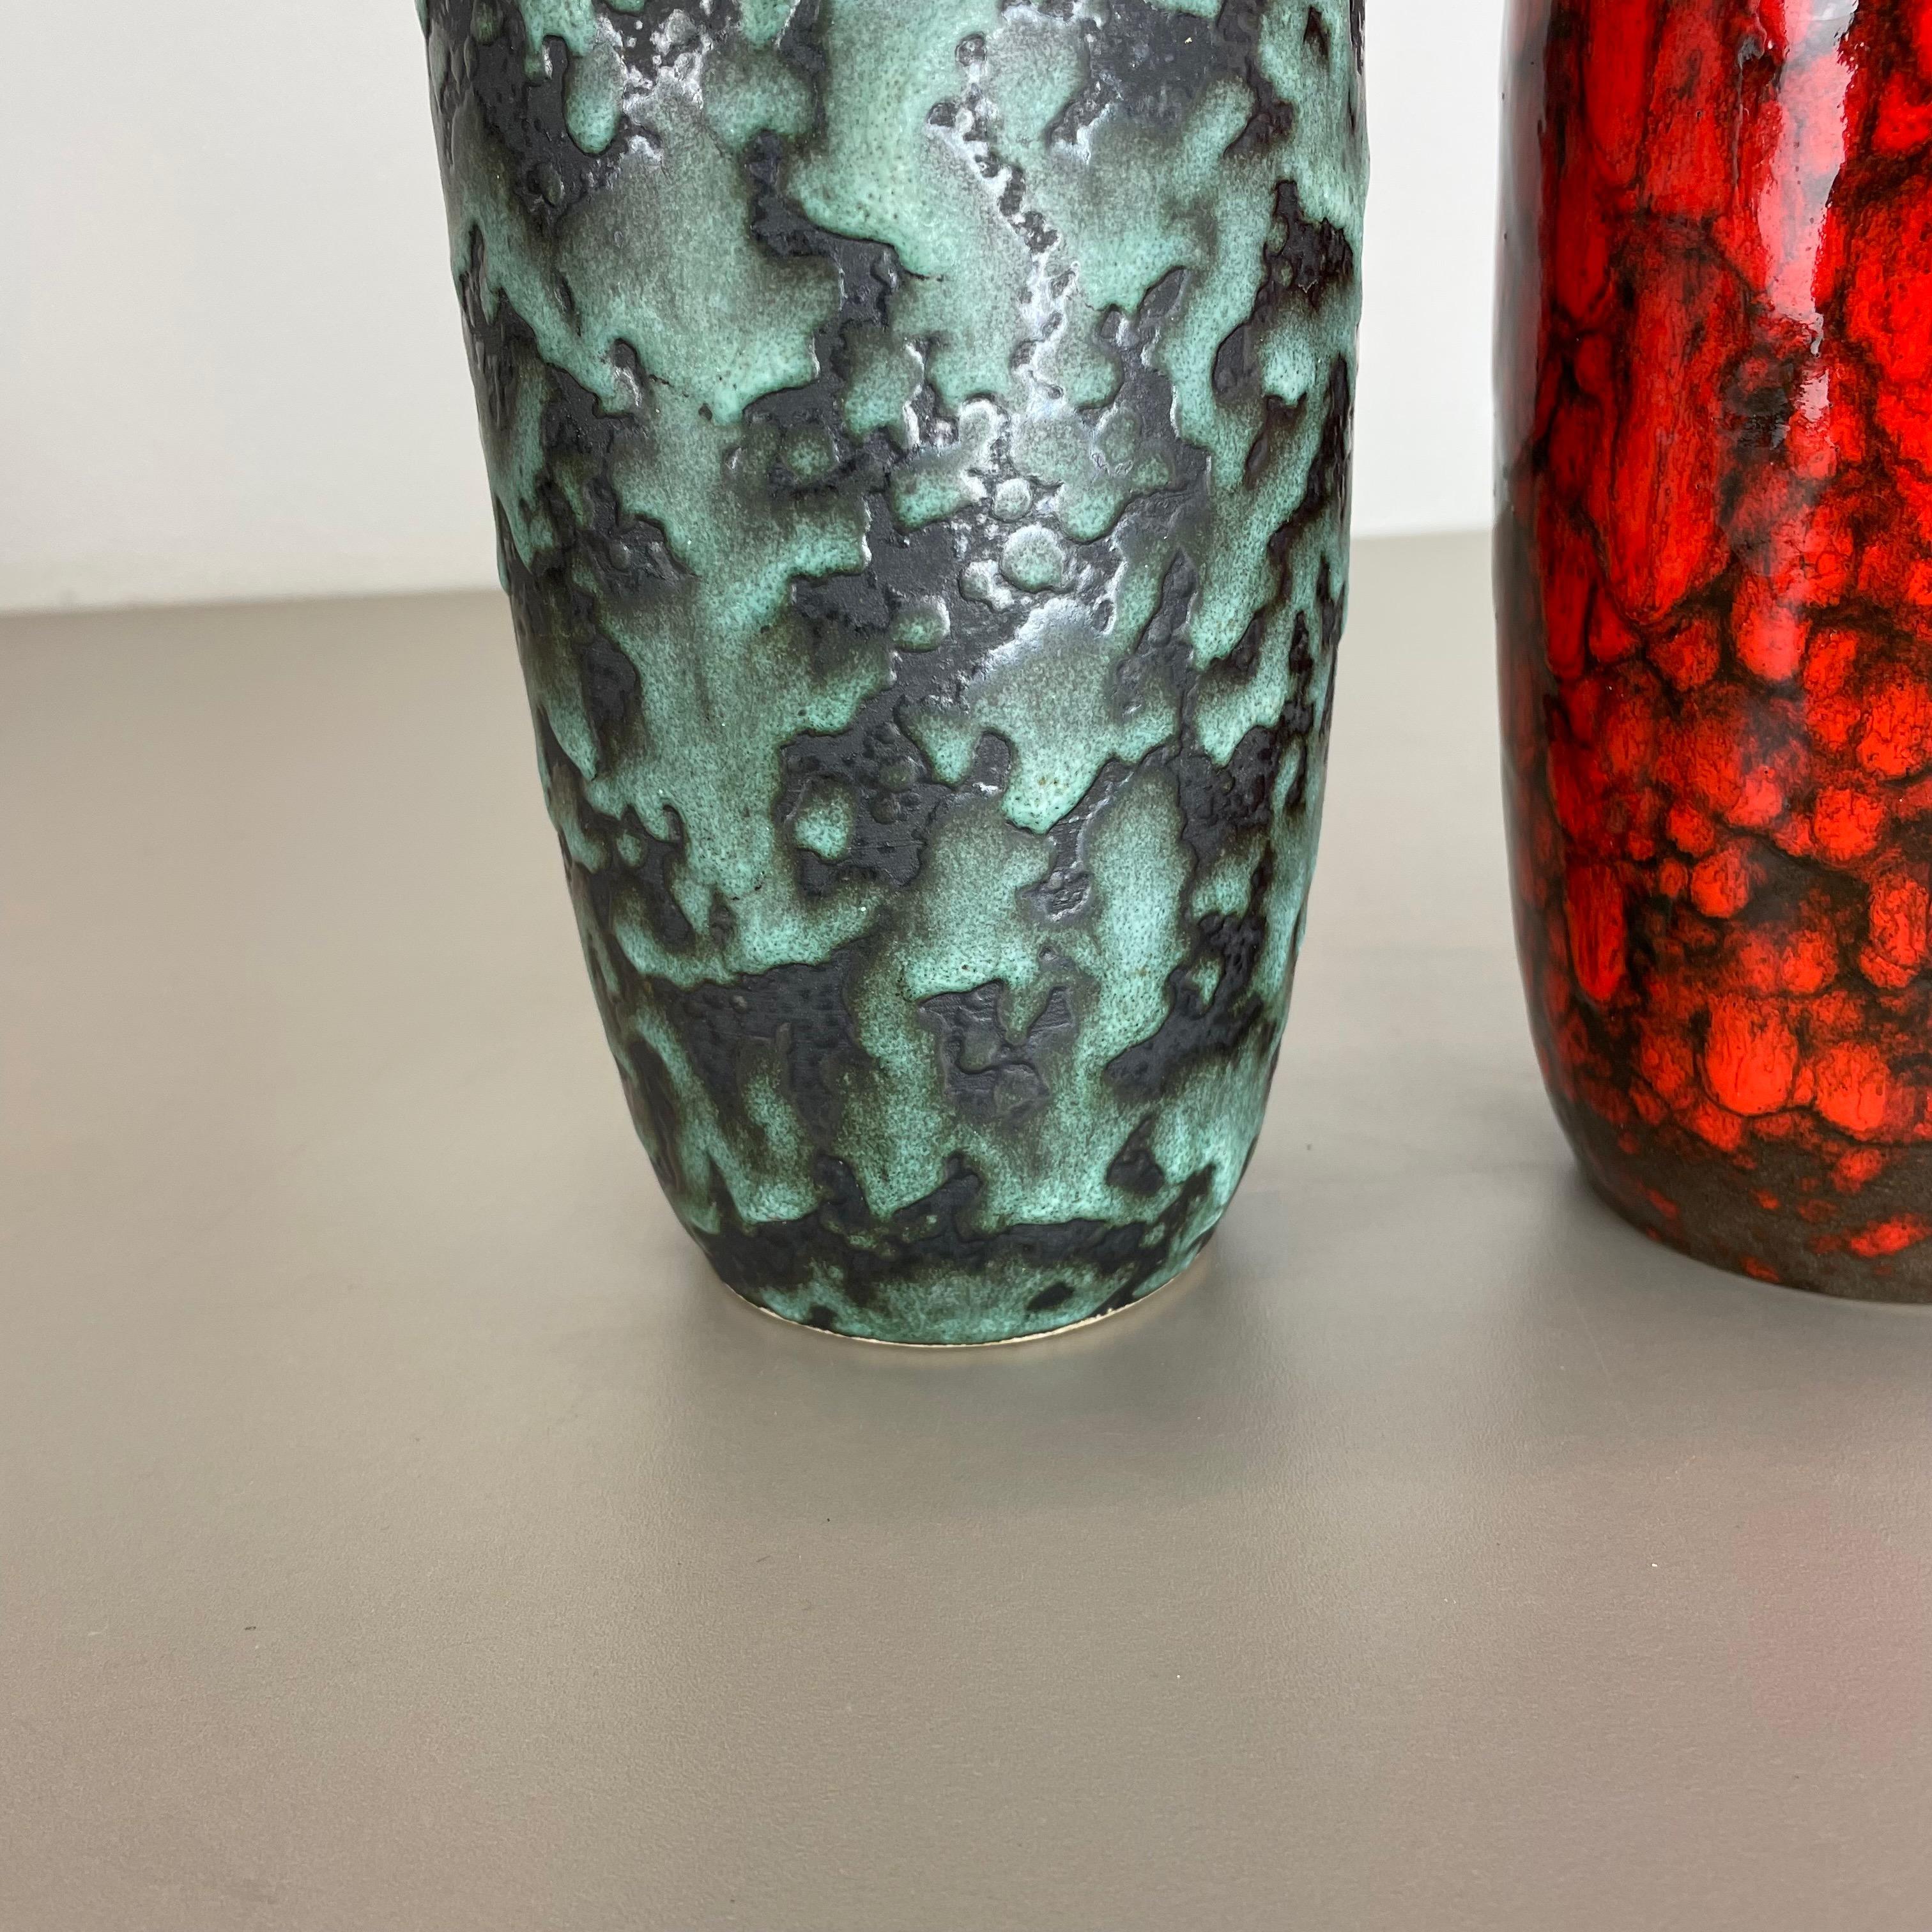 Set of 2 Rare Super Color Crusty Fat Lava Vases by Scheurich, Germany WGP, 1970s For Sale 2